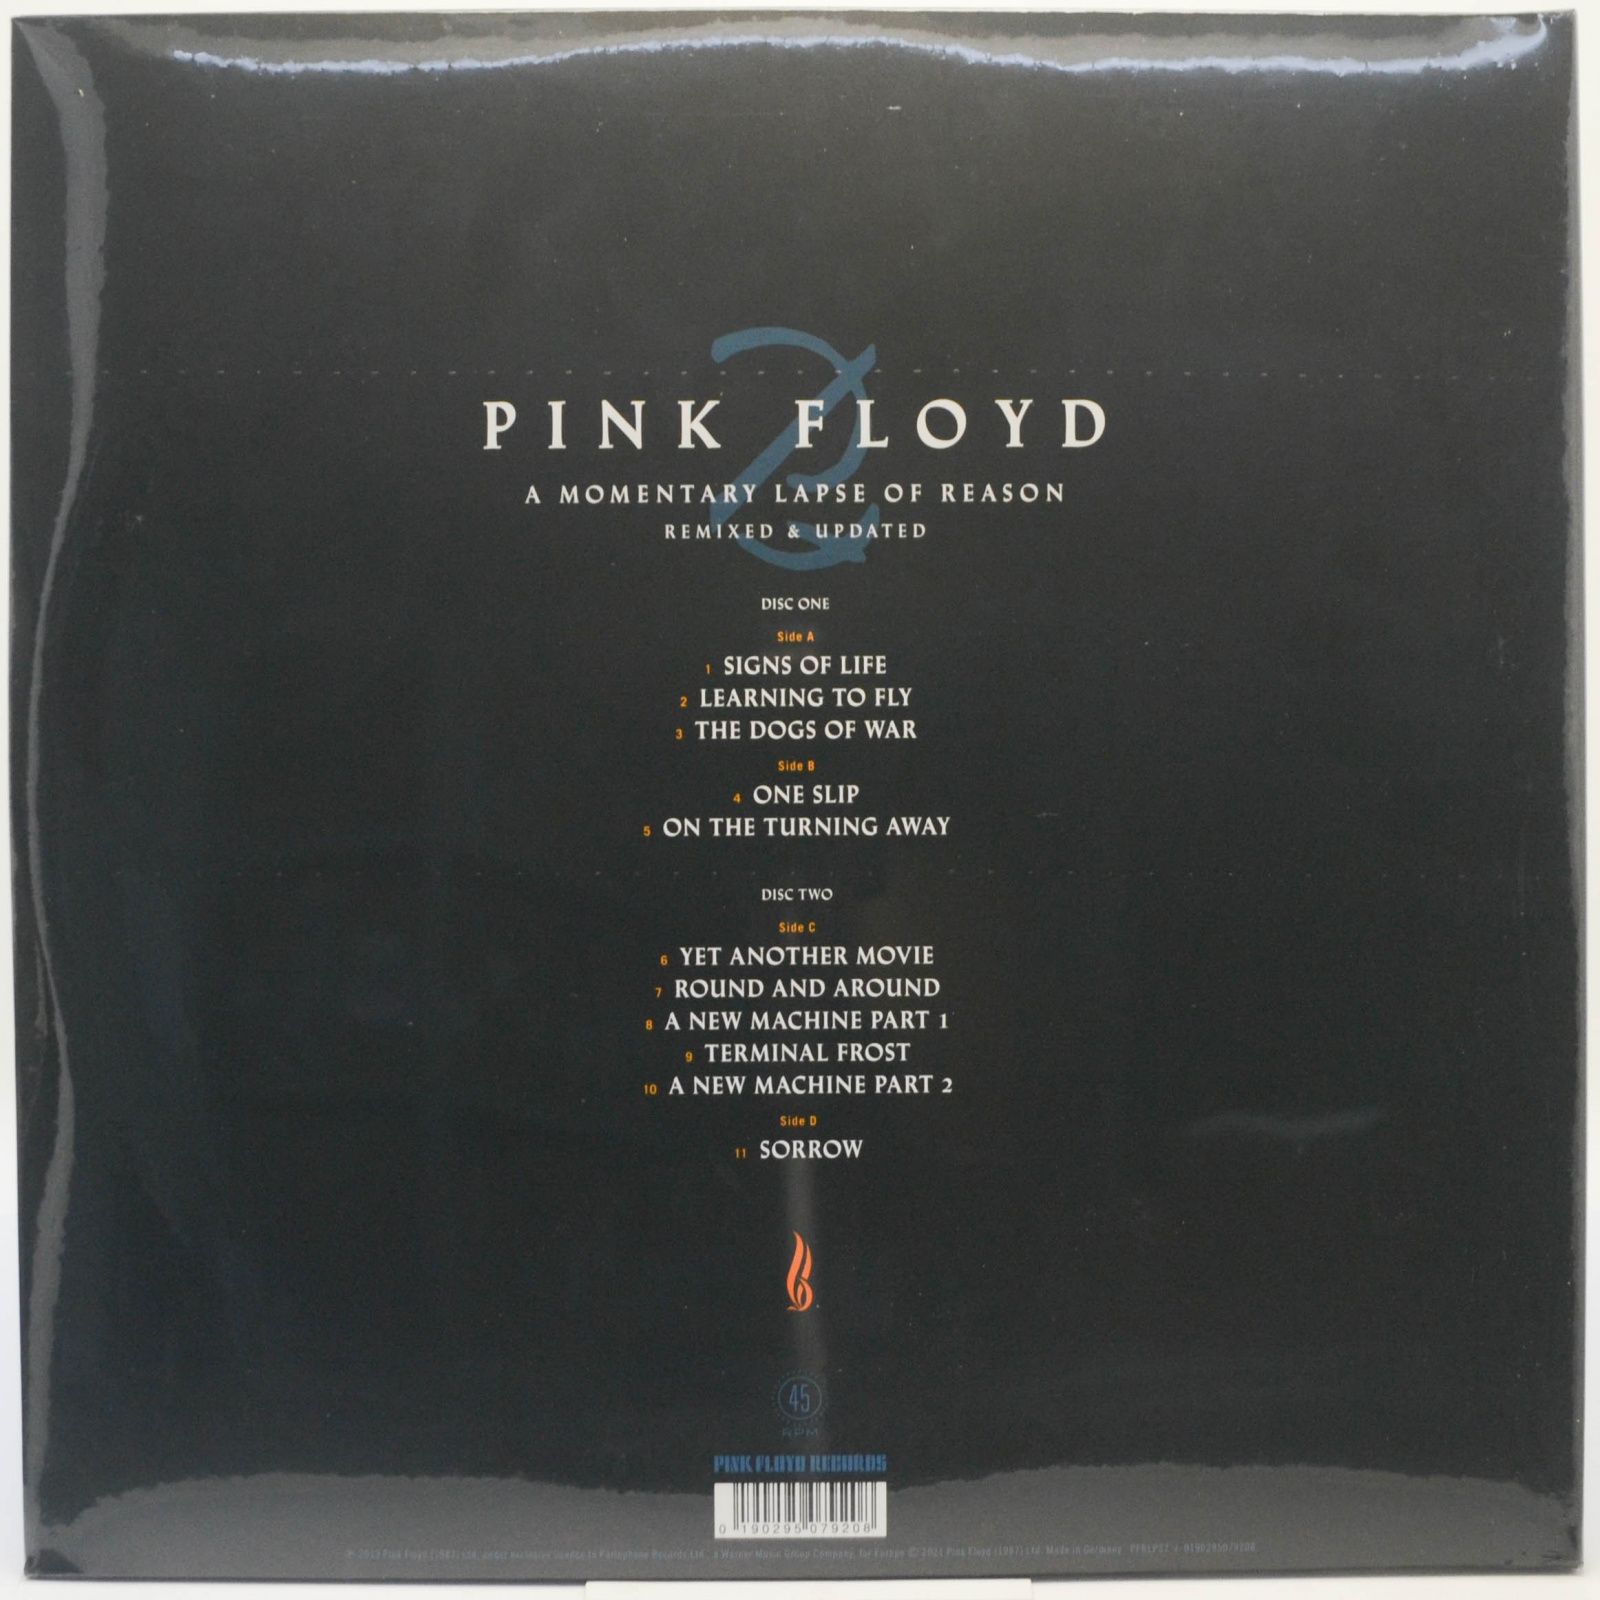 Pink Floyd — A Momentary Lapse Of Reason (Remixed & Updated) (2LP), 1987